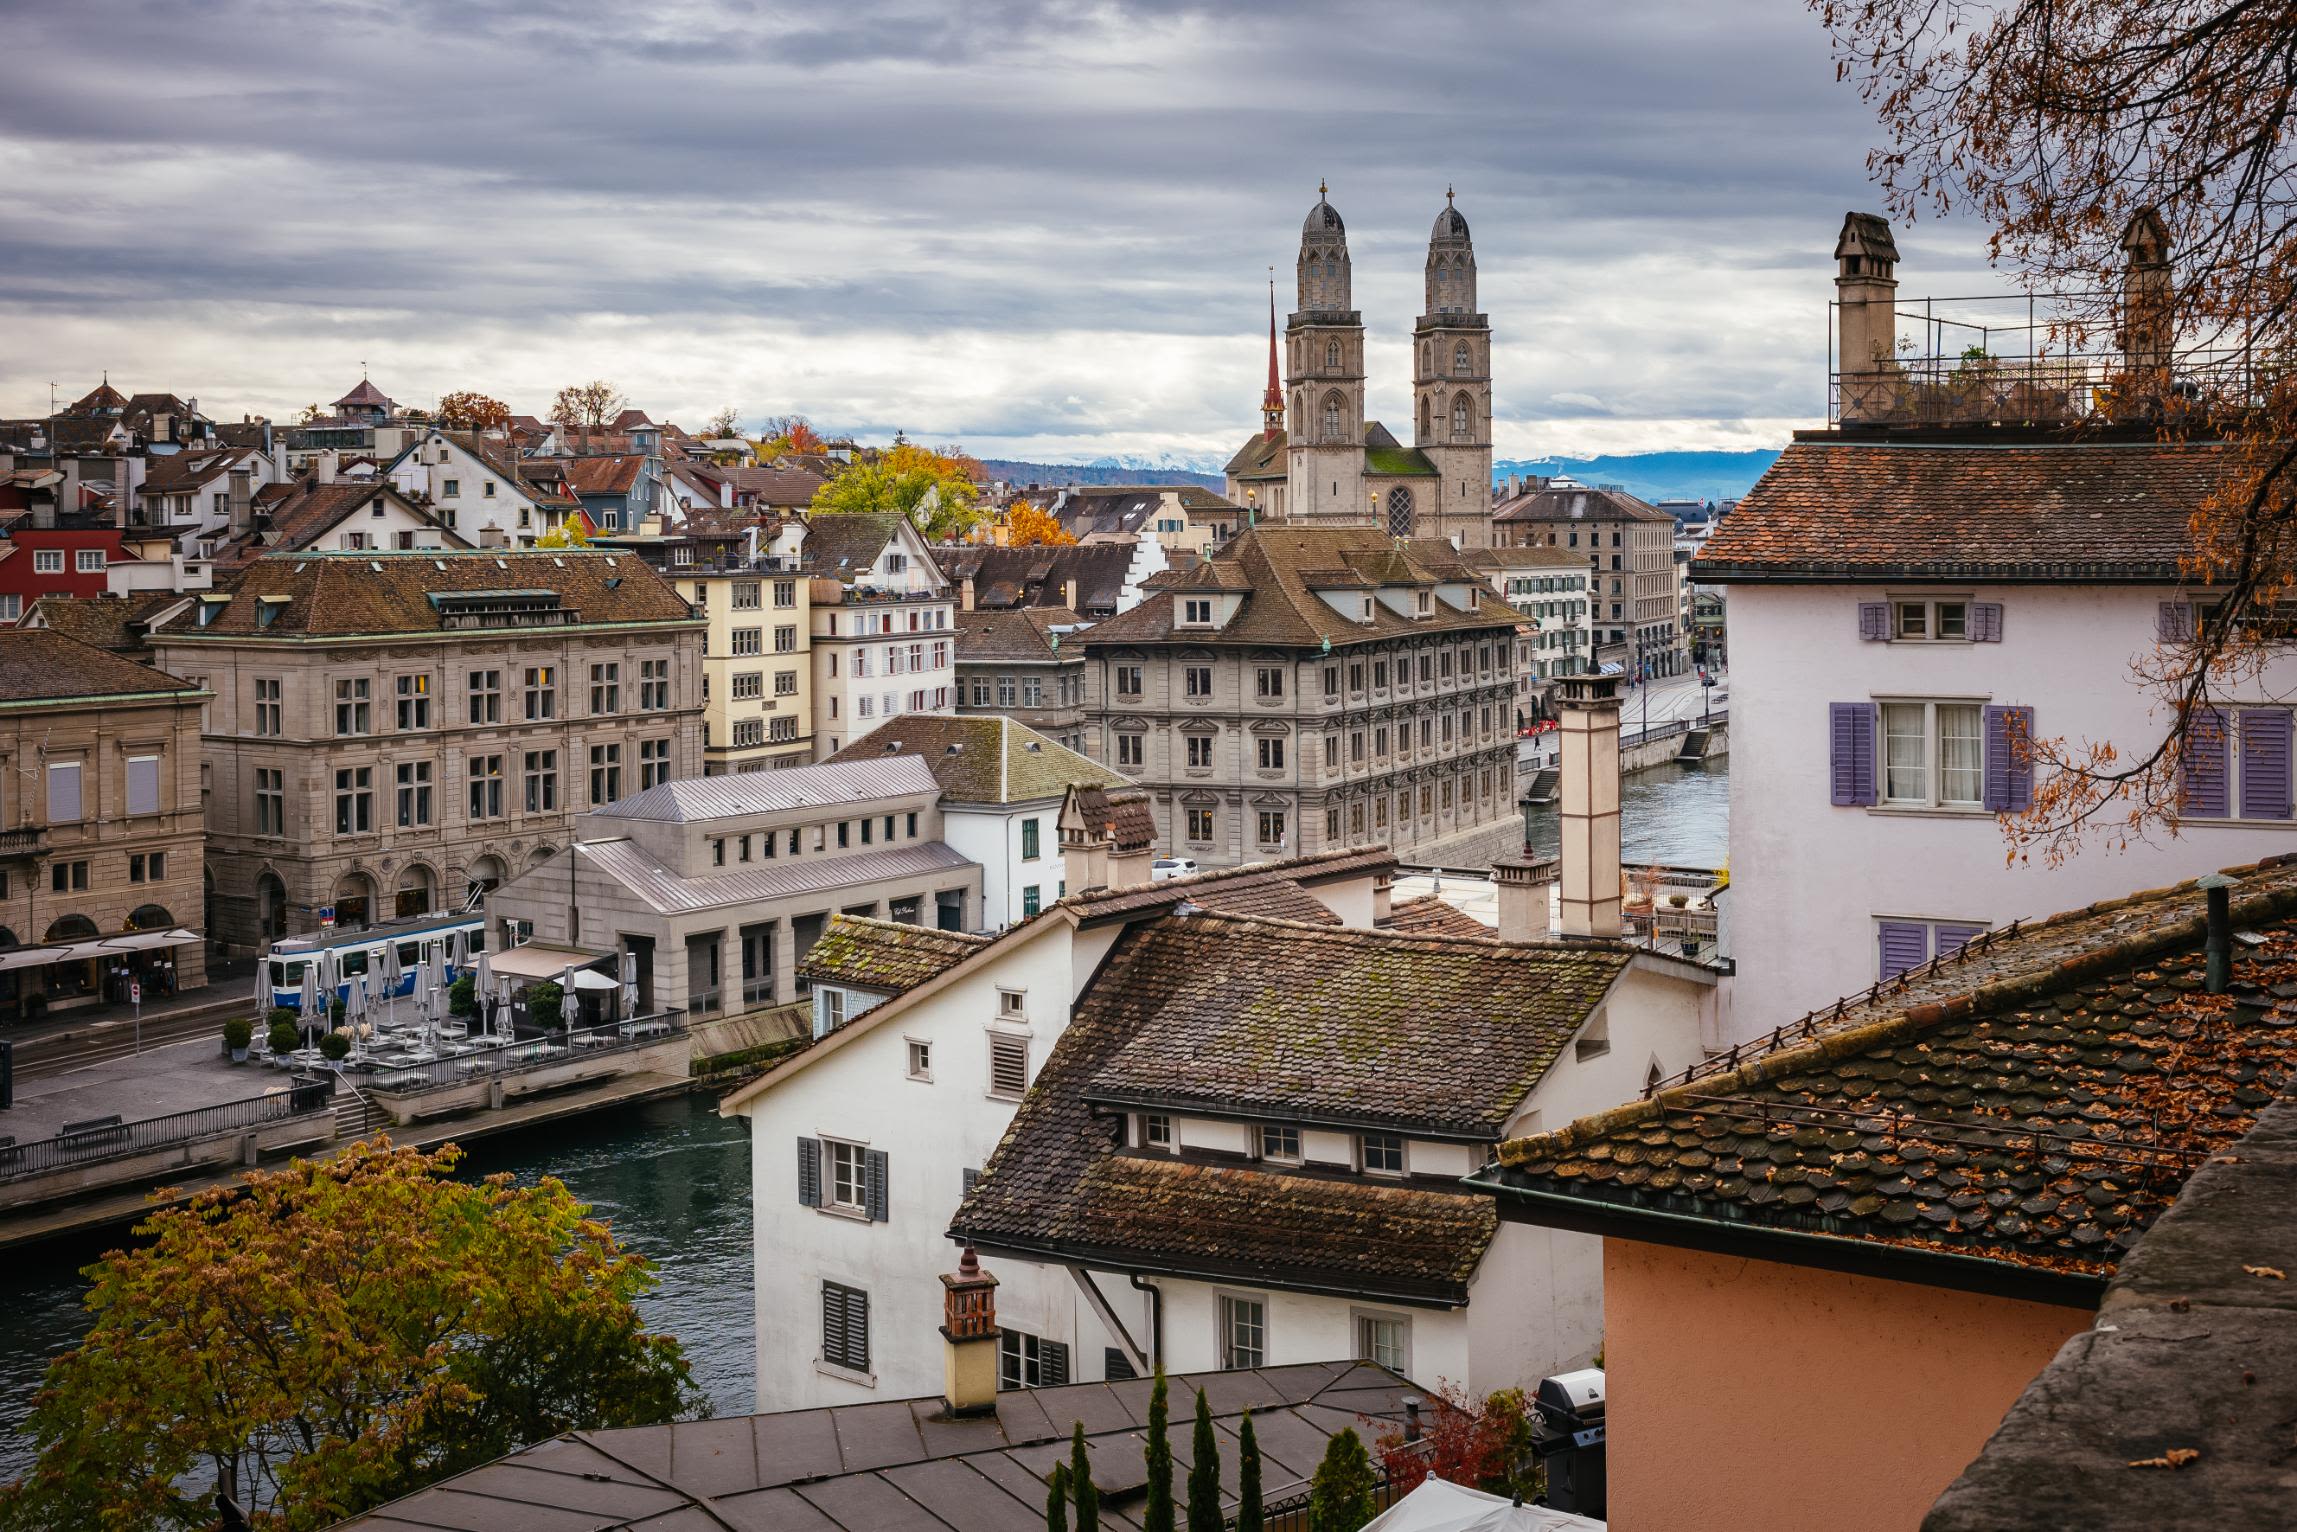 <strong>#3. Zurich, Switzerland: </strong>Known for its banking history, Zurich is also an underrated <a href="index.php?page=&url=https%3A%2F%2Fedition.cnn.com%2Ftravel%2Farticle%2Fzurich-switzerland-food%2Findex.html" target="_blank">European food city</a>.